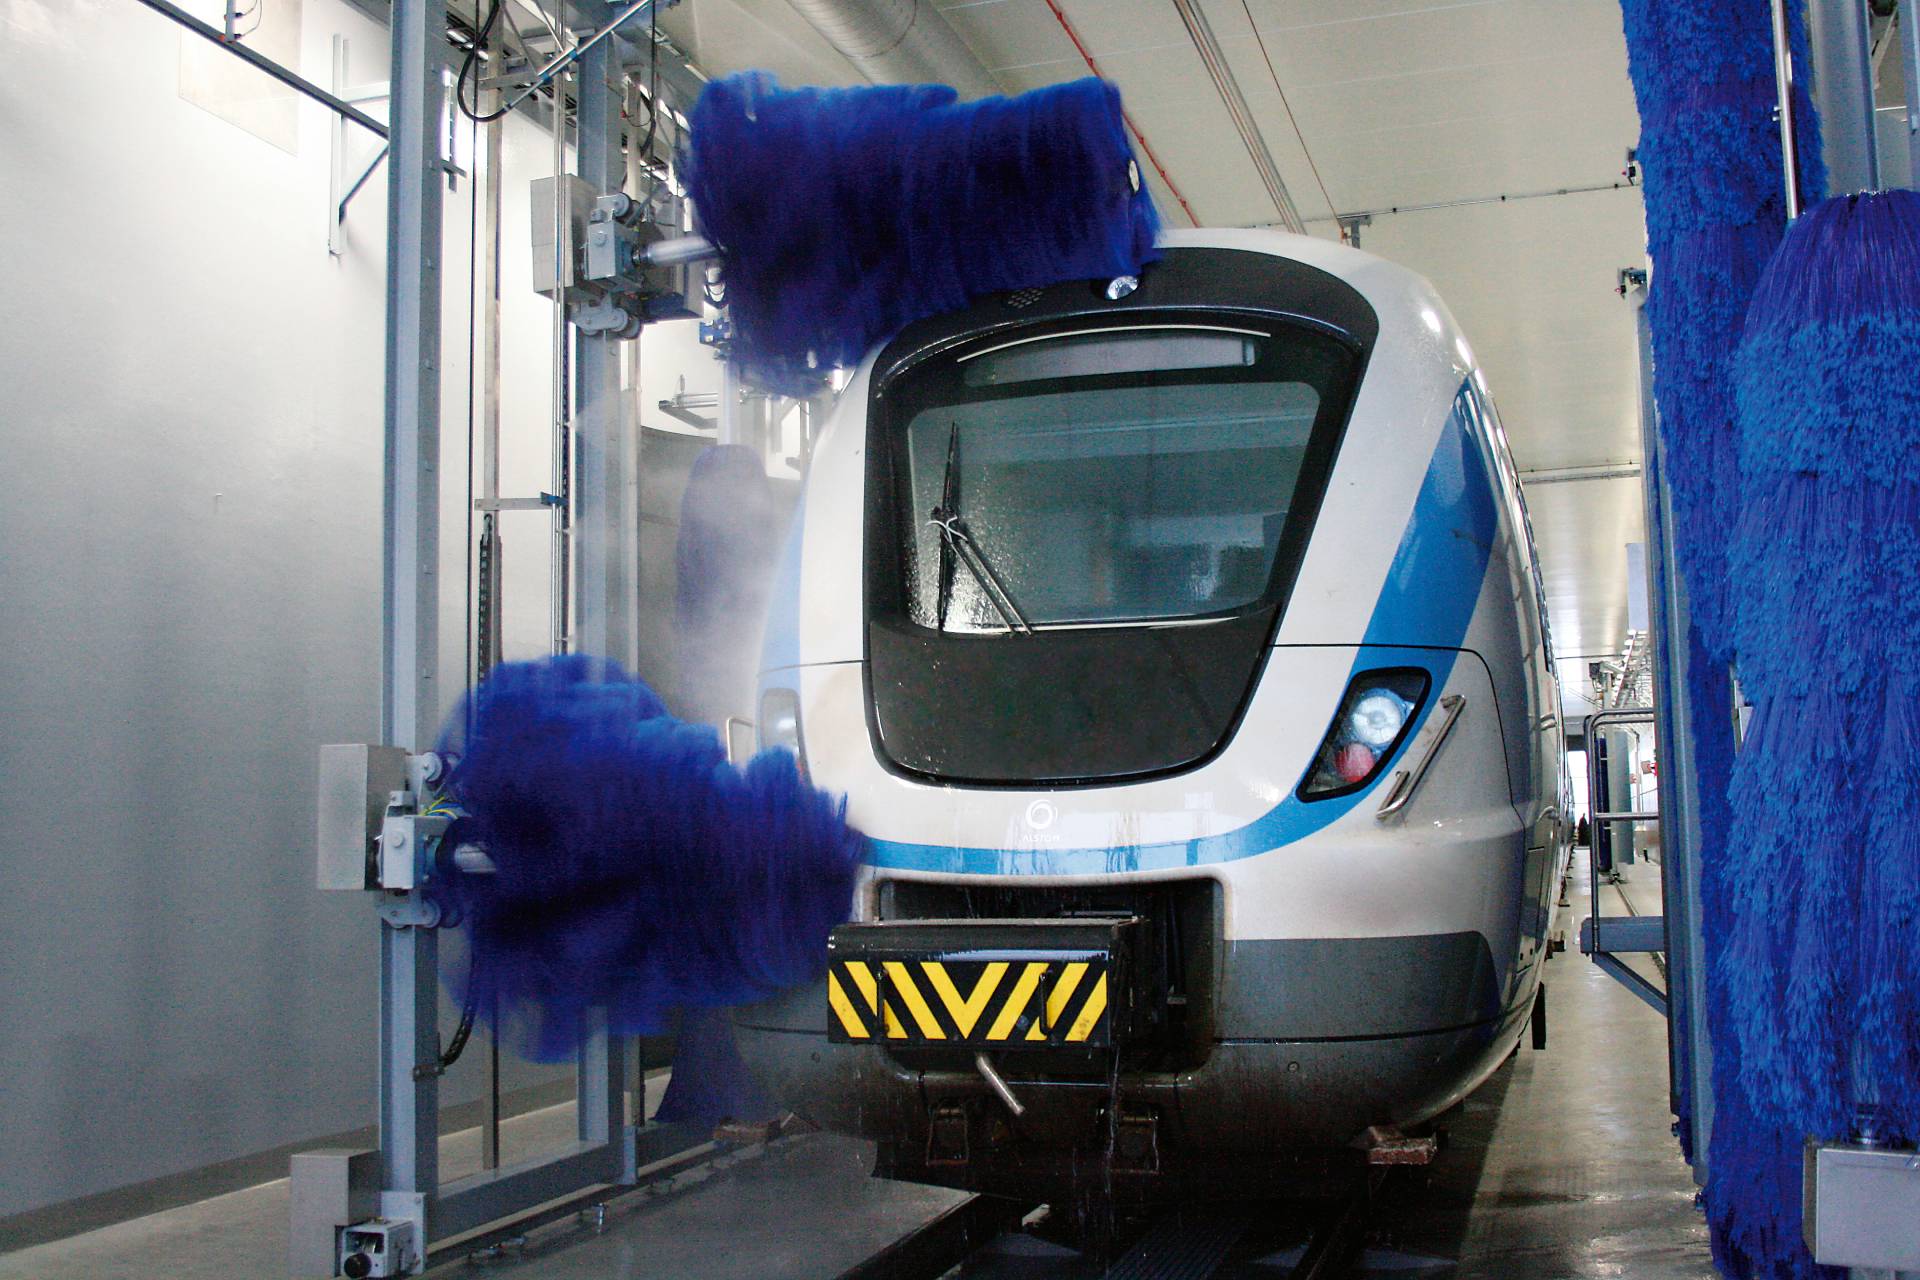 InterClean brush wash system cleaning a white and blue train.